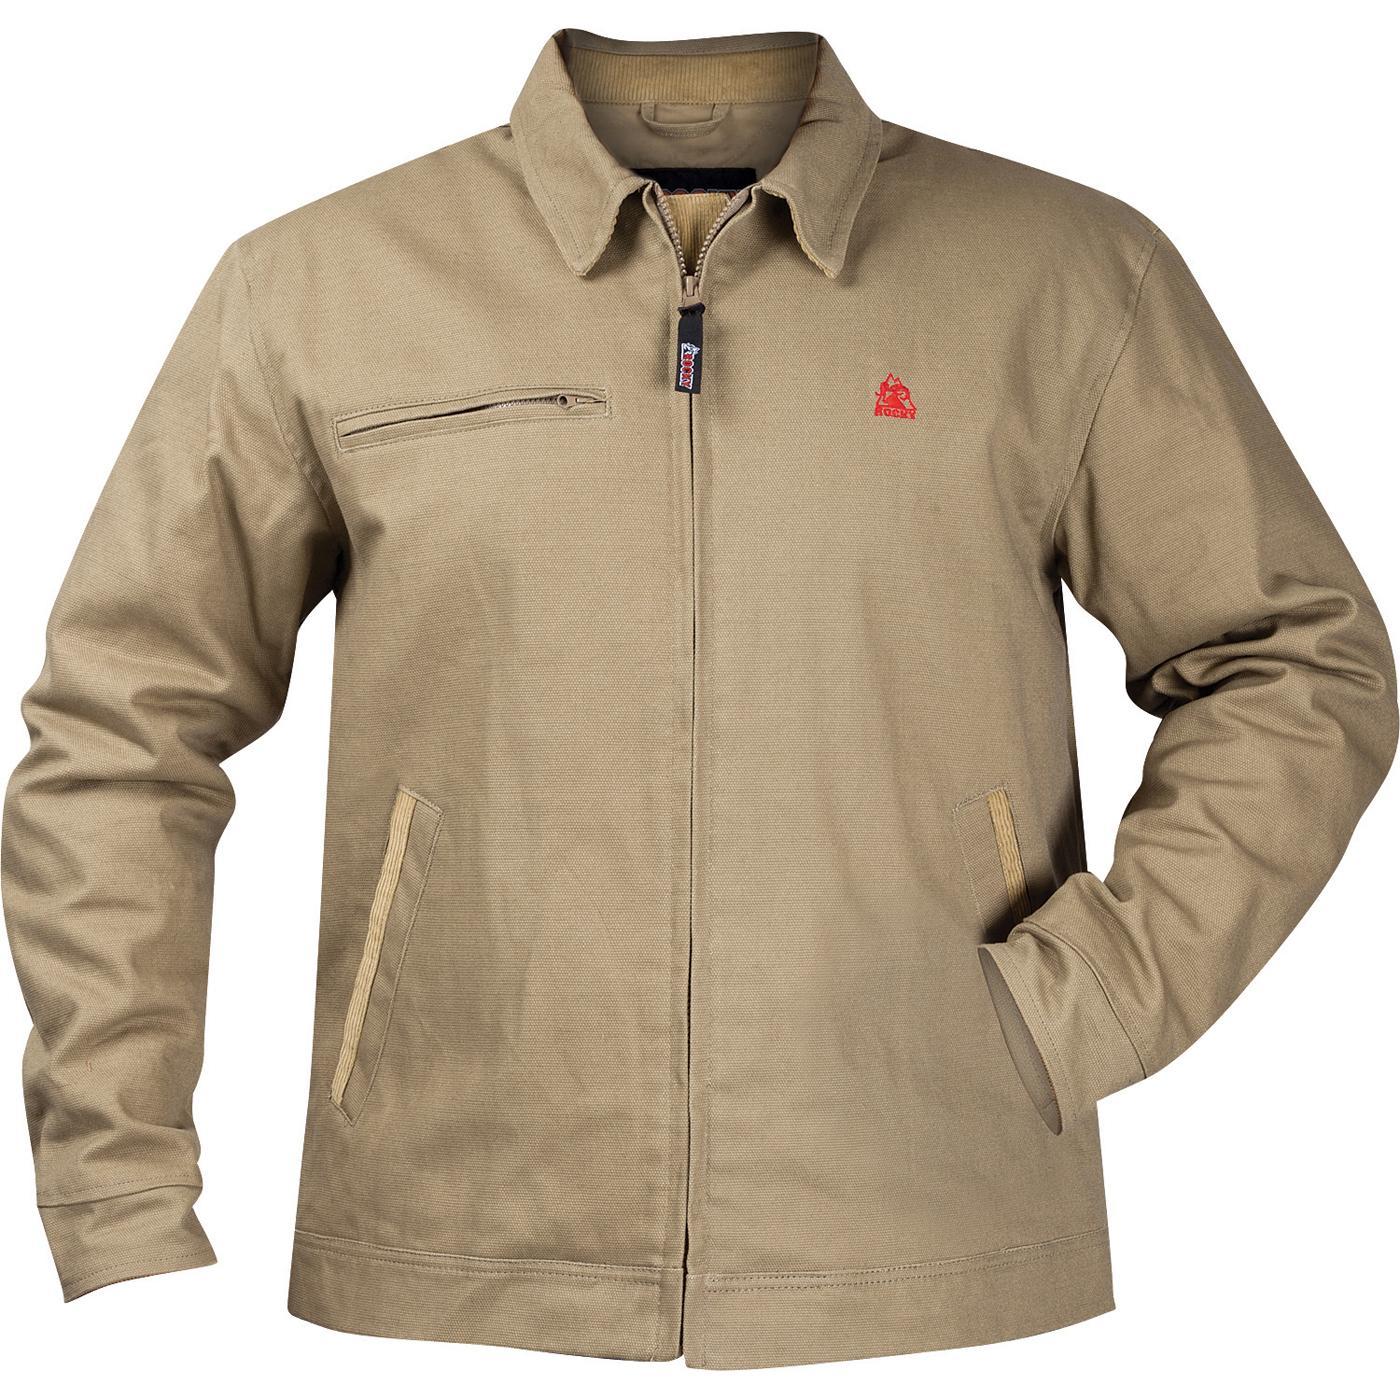 Rocky Core: Men's Insulated Canvas Short Jacket - Style #621022